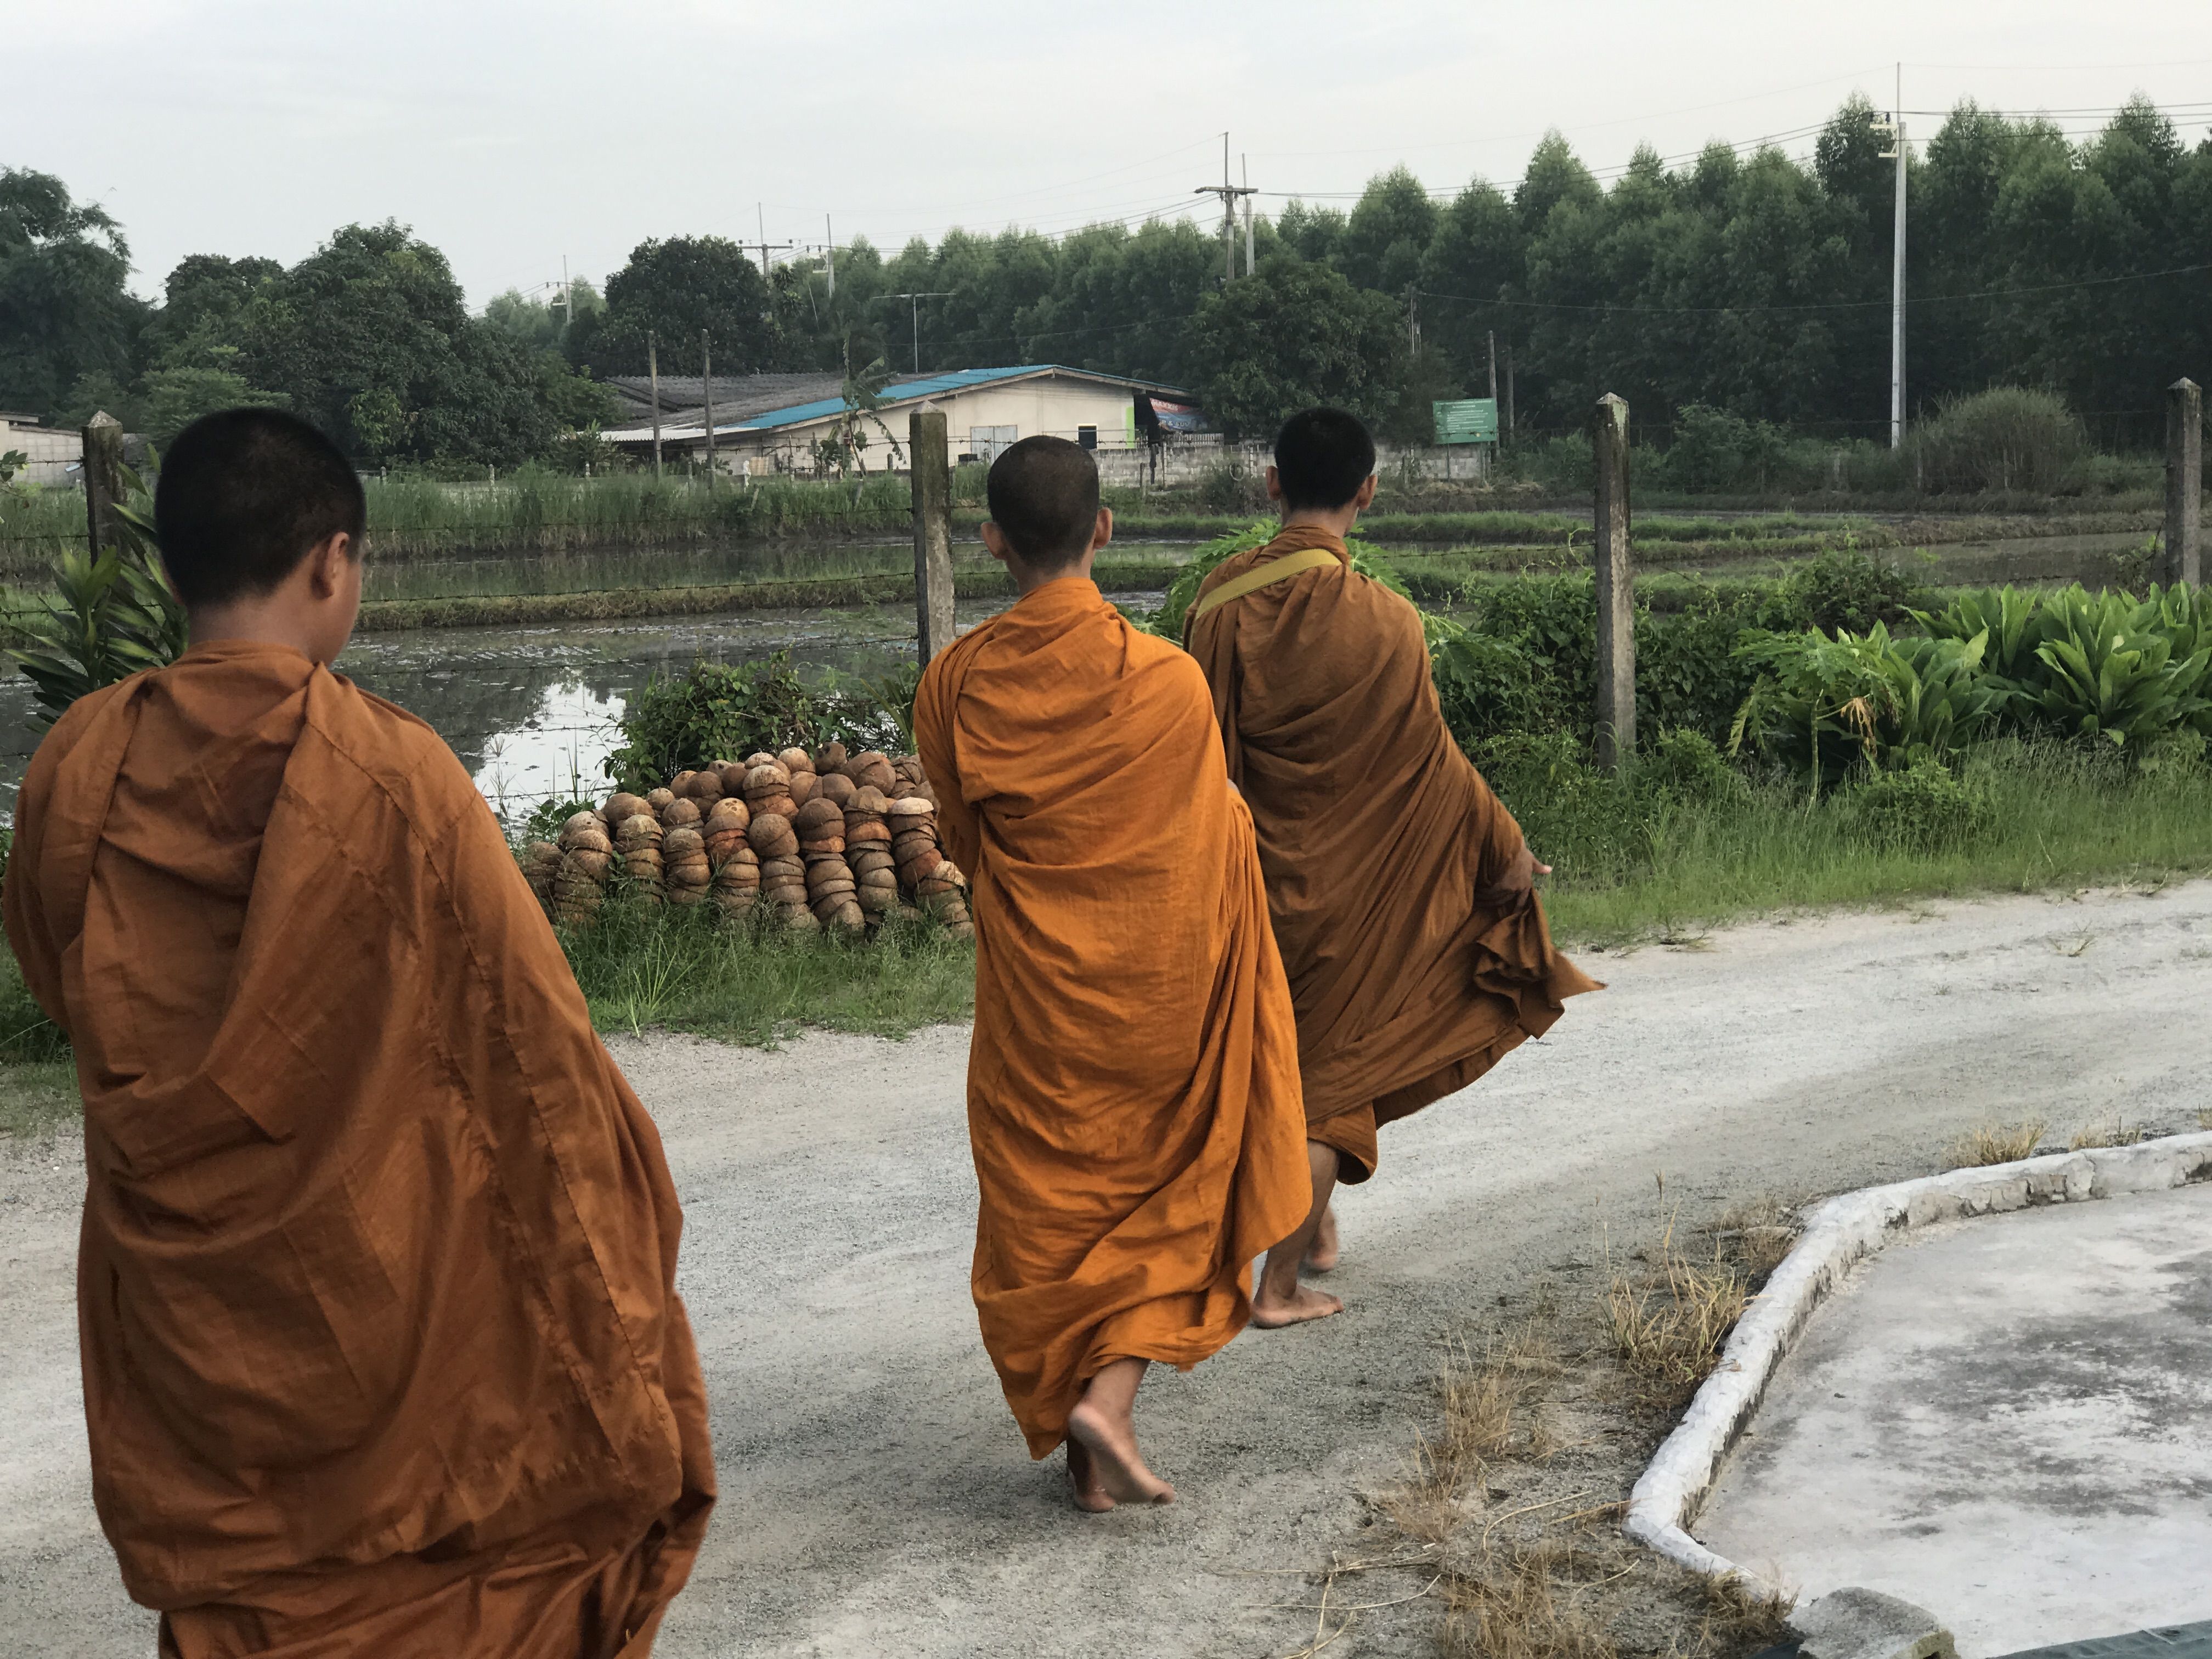 Three monks. Image by Kiley Price. Thailand, 2018.